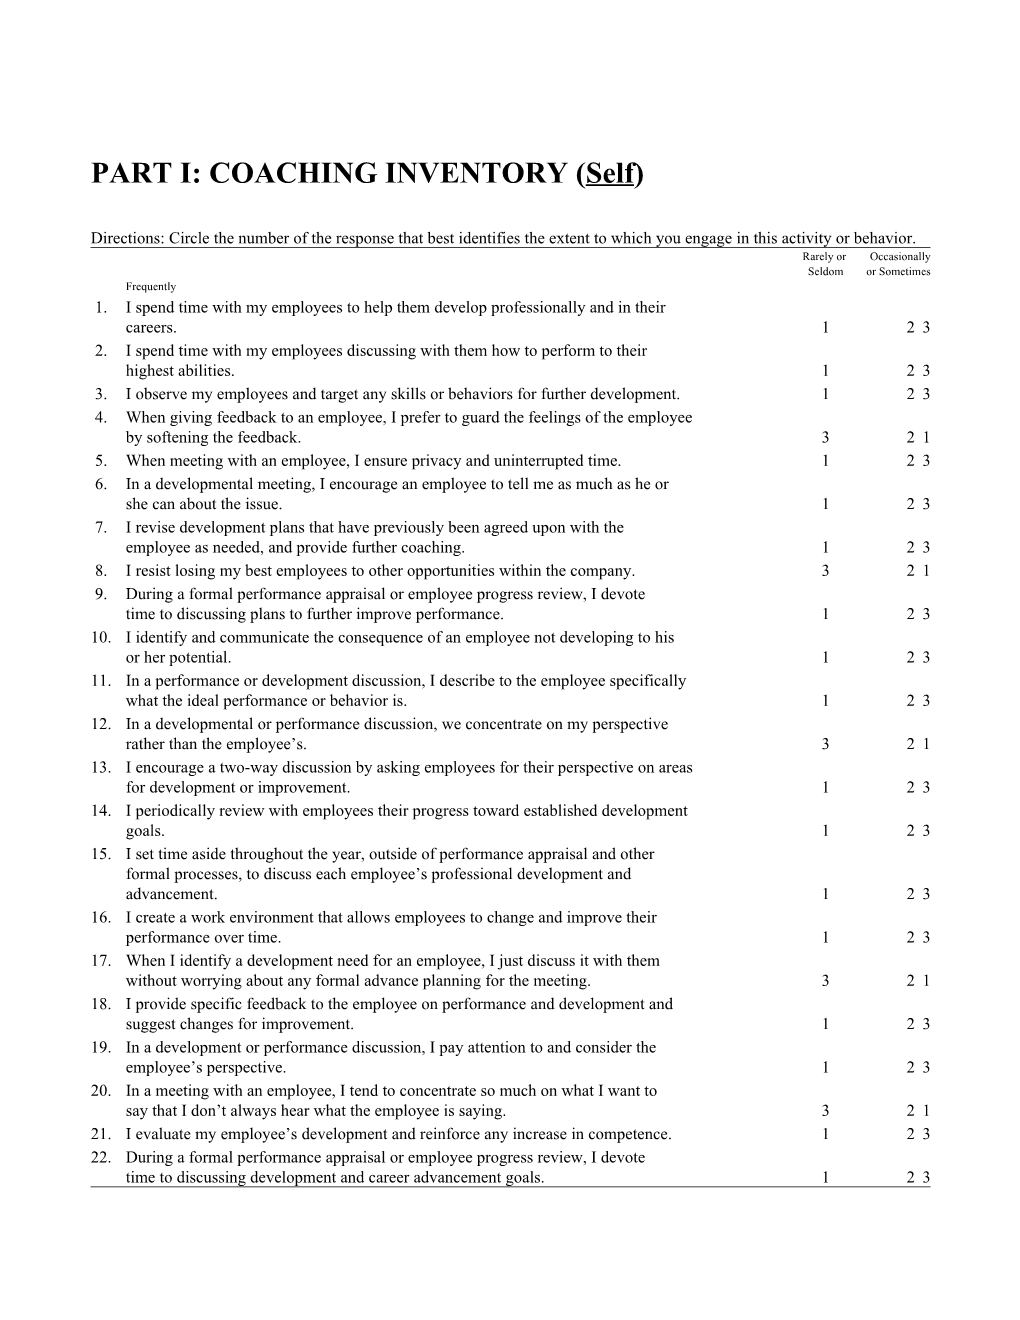 PART I: COACHING INVENTORY (Self)